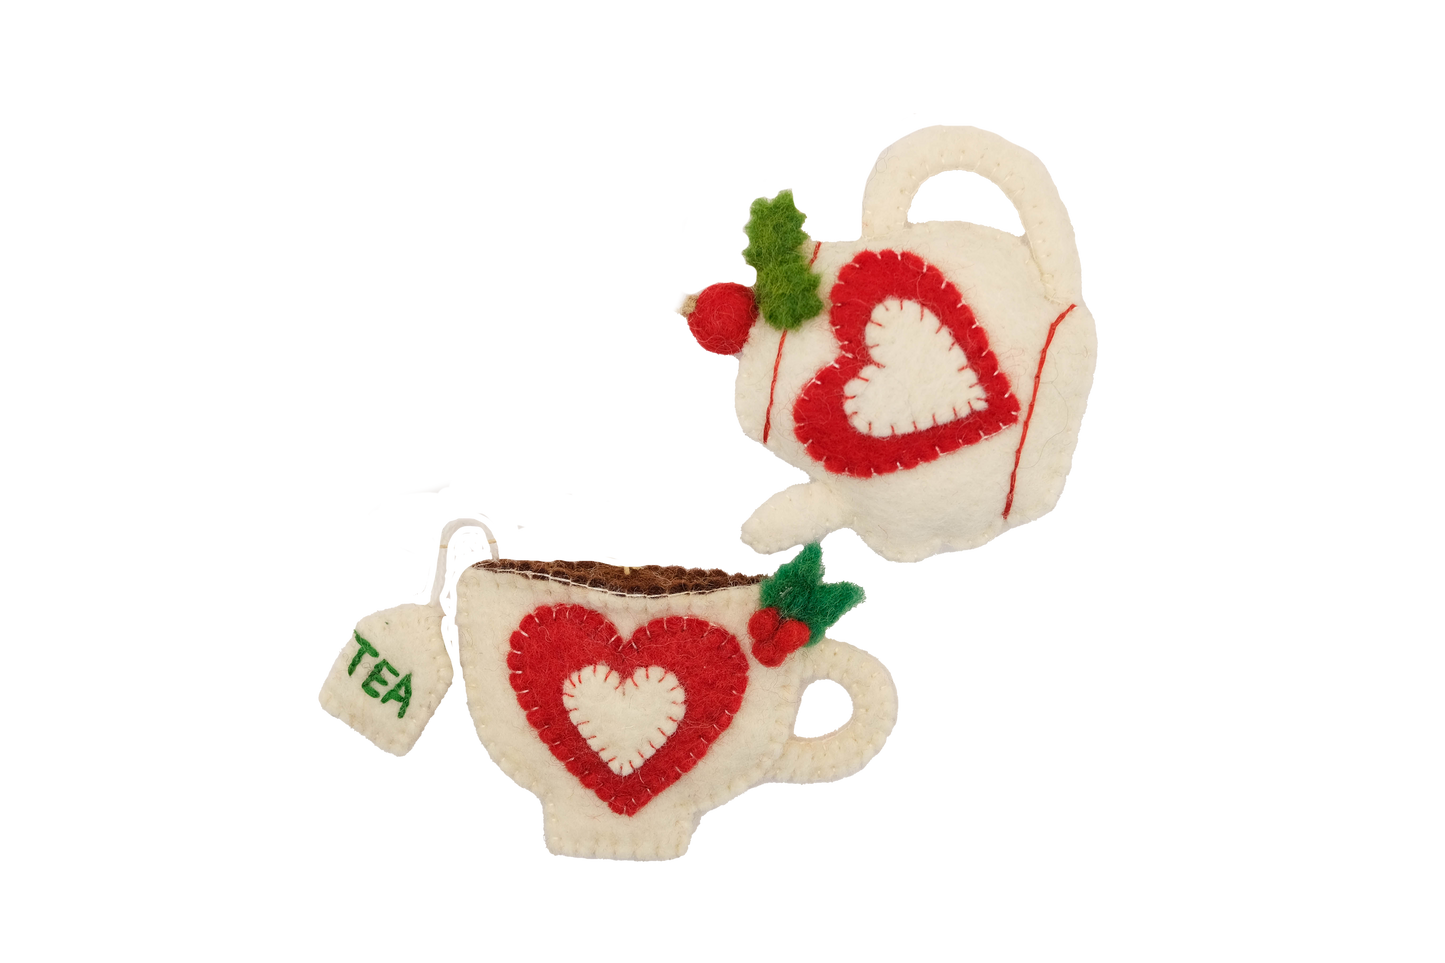 This Global Groove Life, handmade, ethical, fair trade, eco-friendly, sustainable, felt, red and white heart teapot and teacup with holly ornament set was created by artisans in Kathmandu Nepal and will bring colorful warmth and fun to your Christmas tree this season.